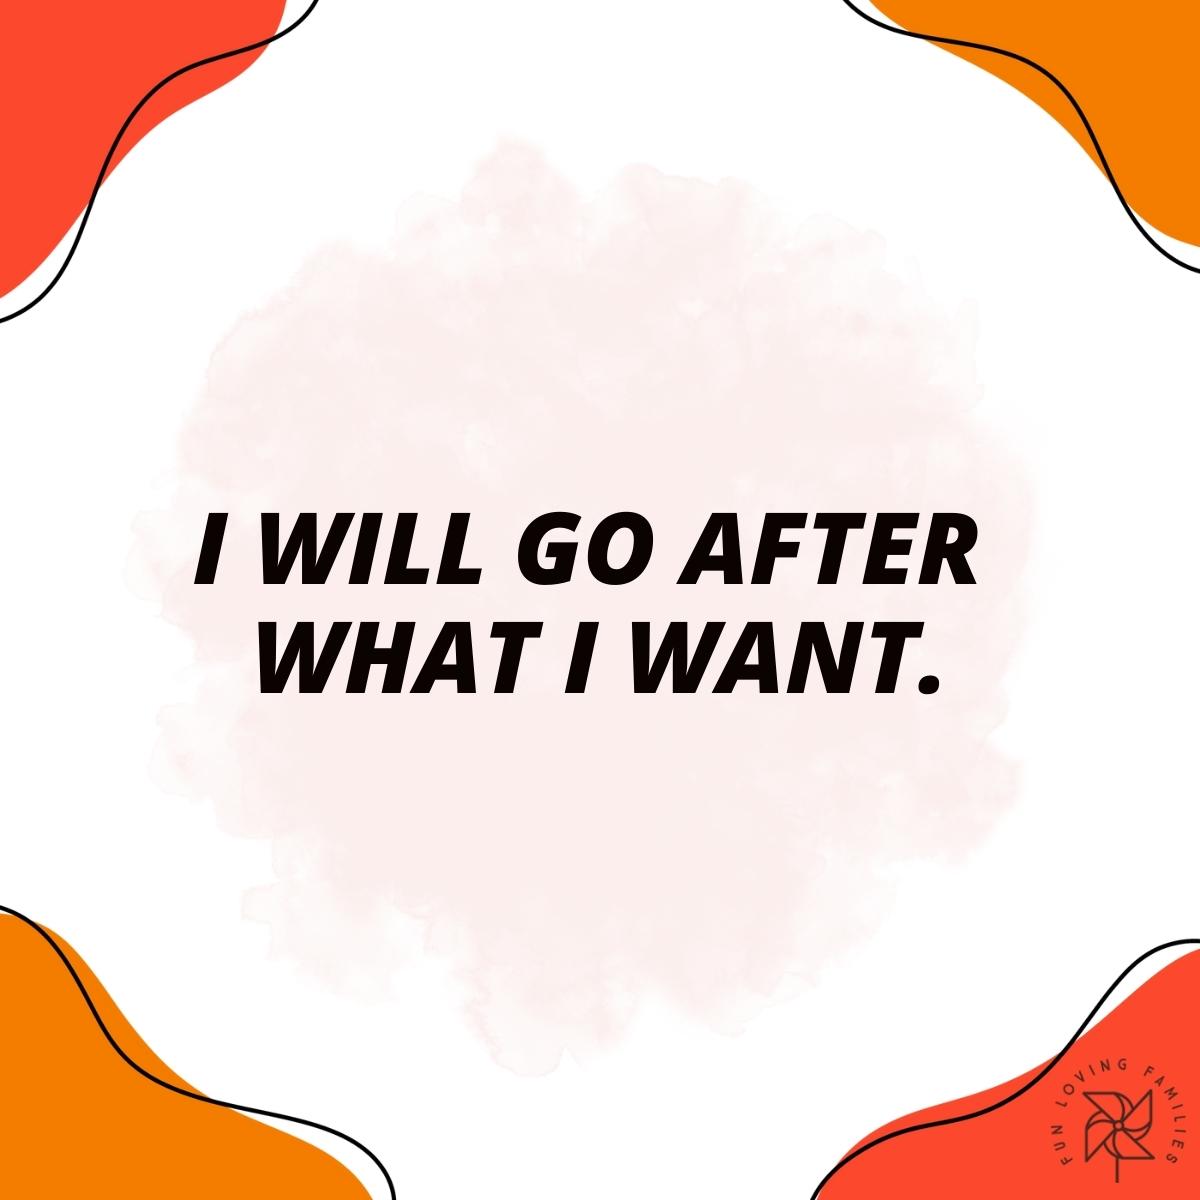 I will go after what I want affirmation